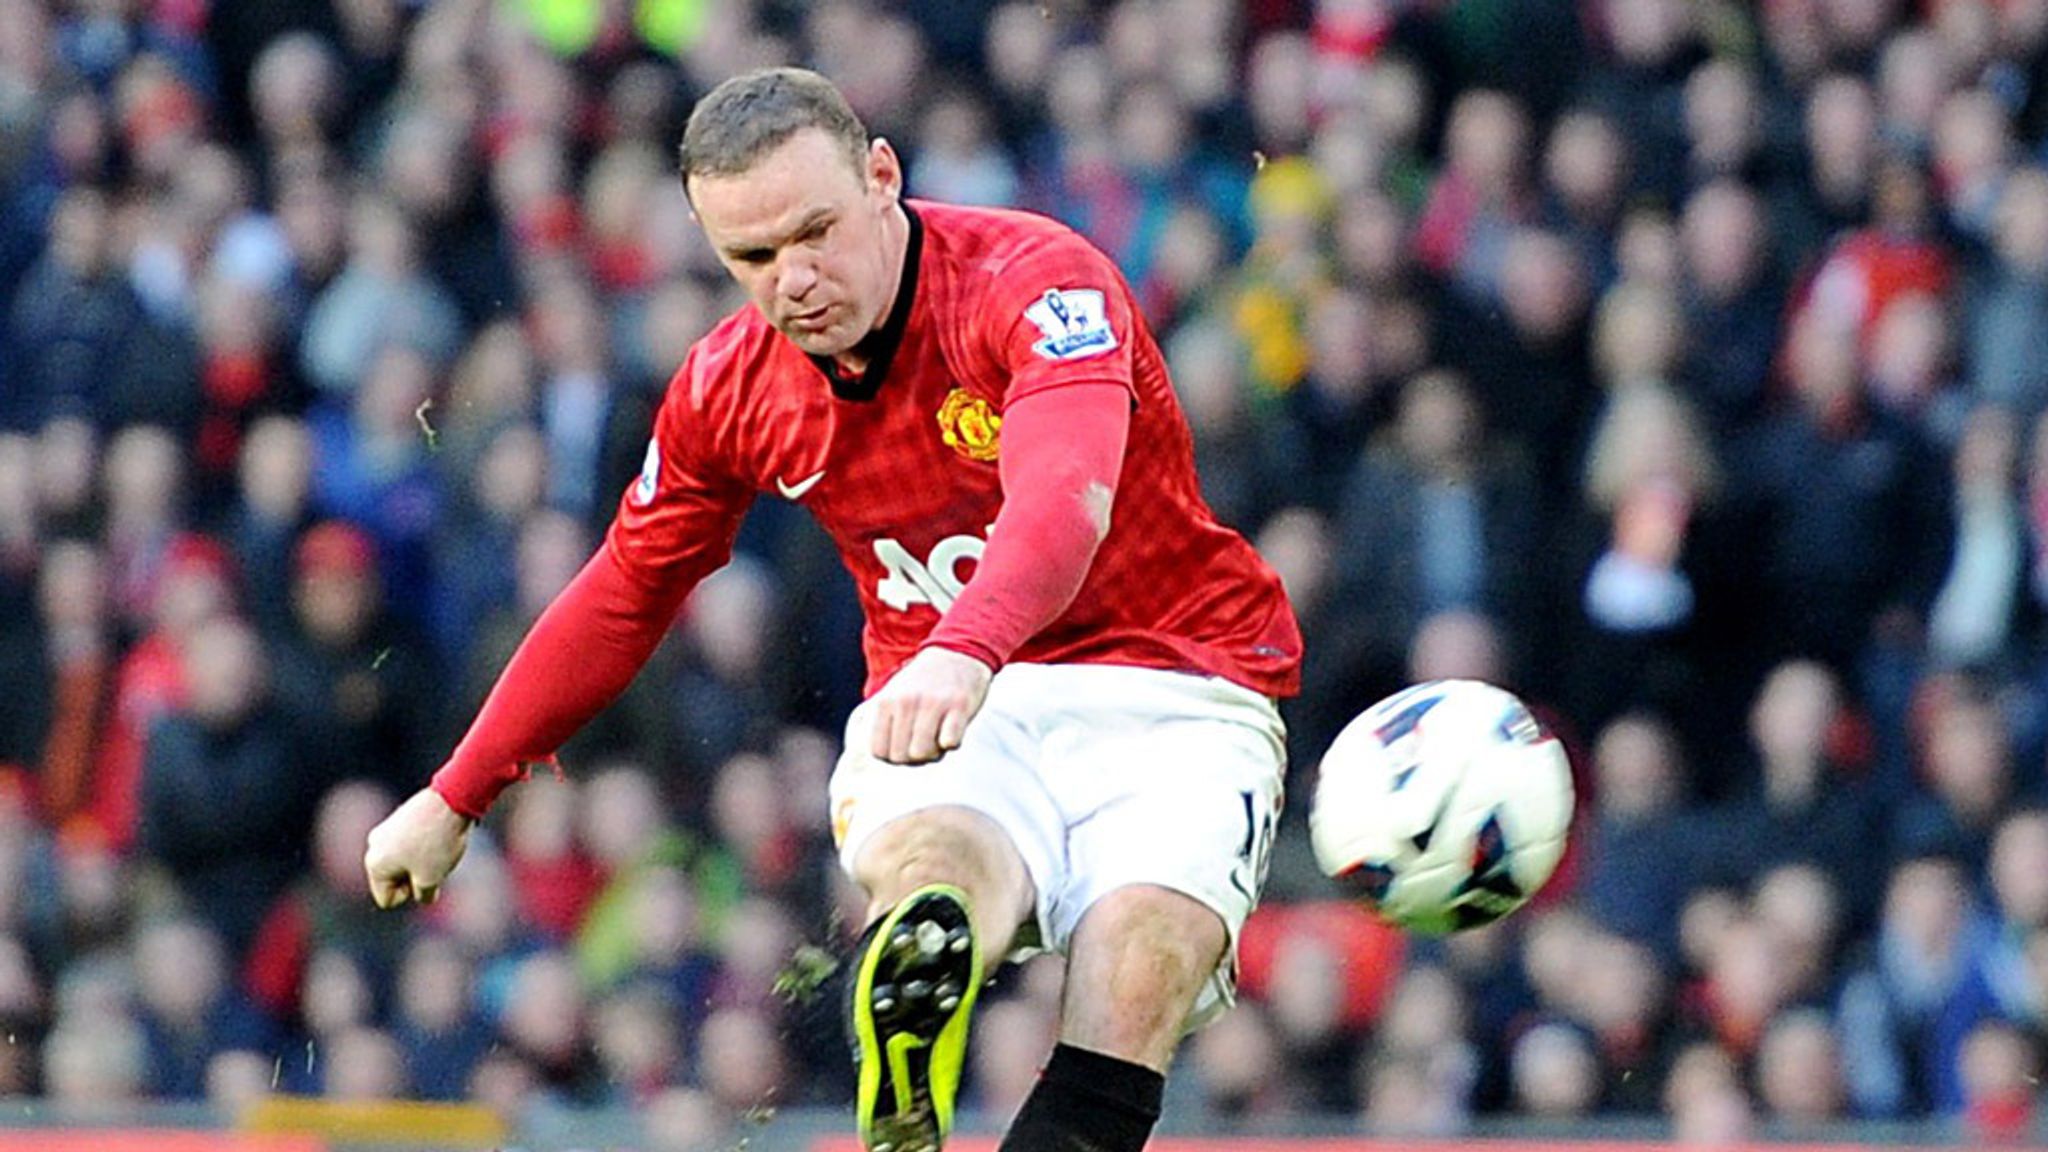 Manchester United striker Wayne Rooney feels fit and ready for battle